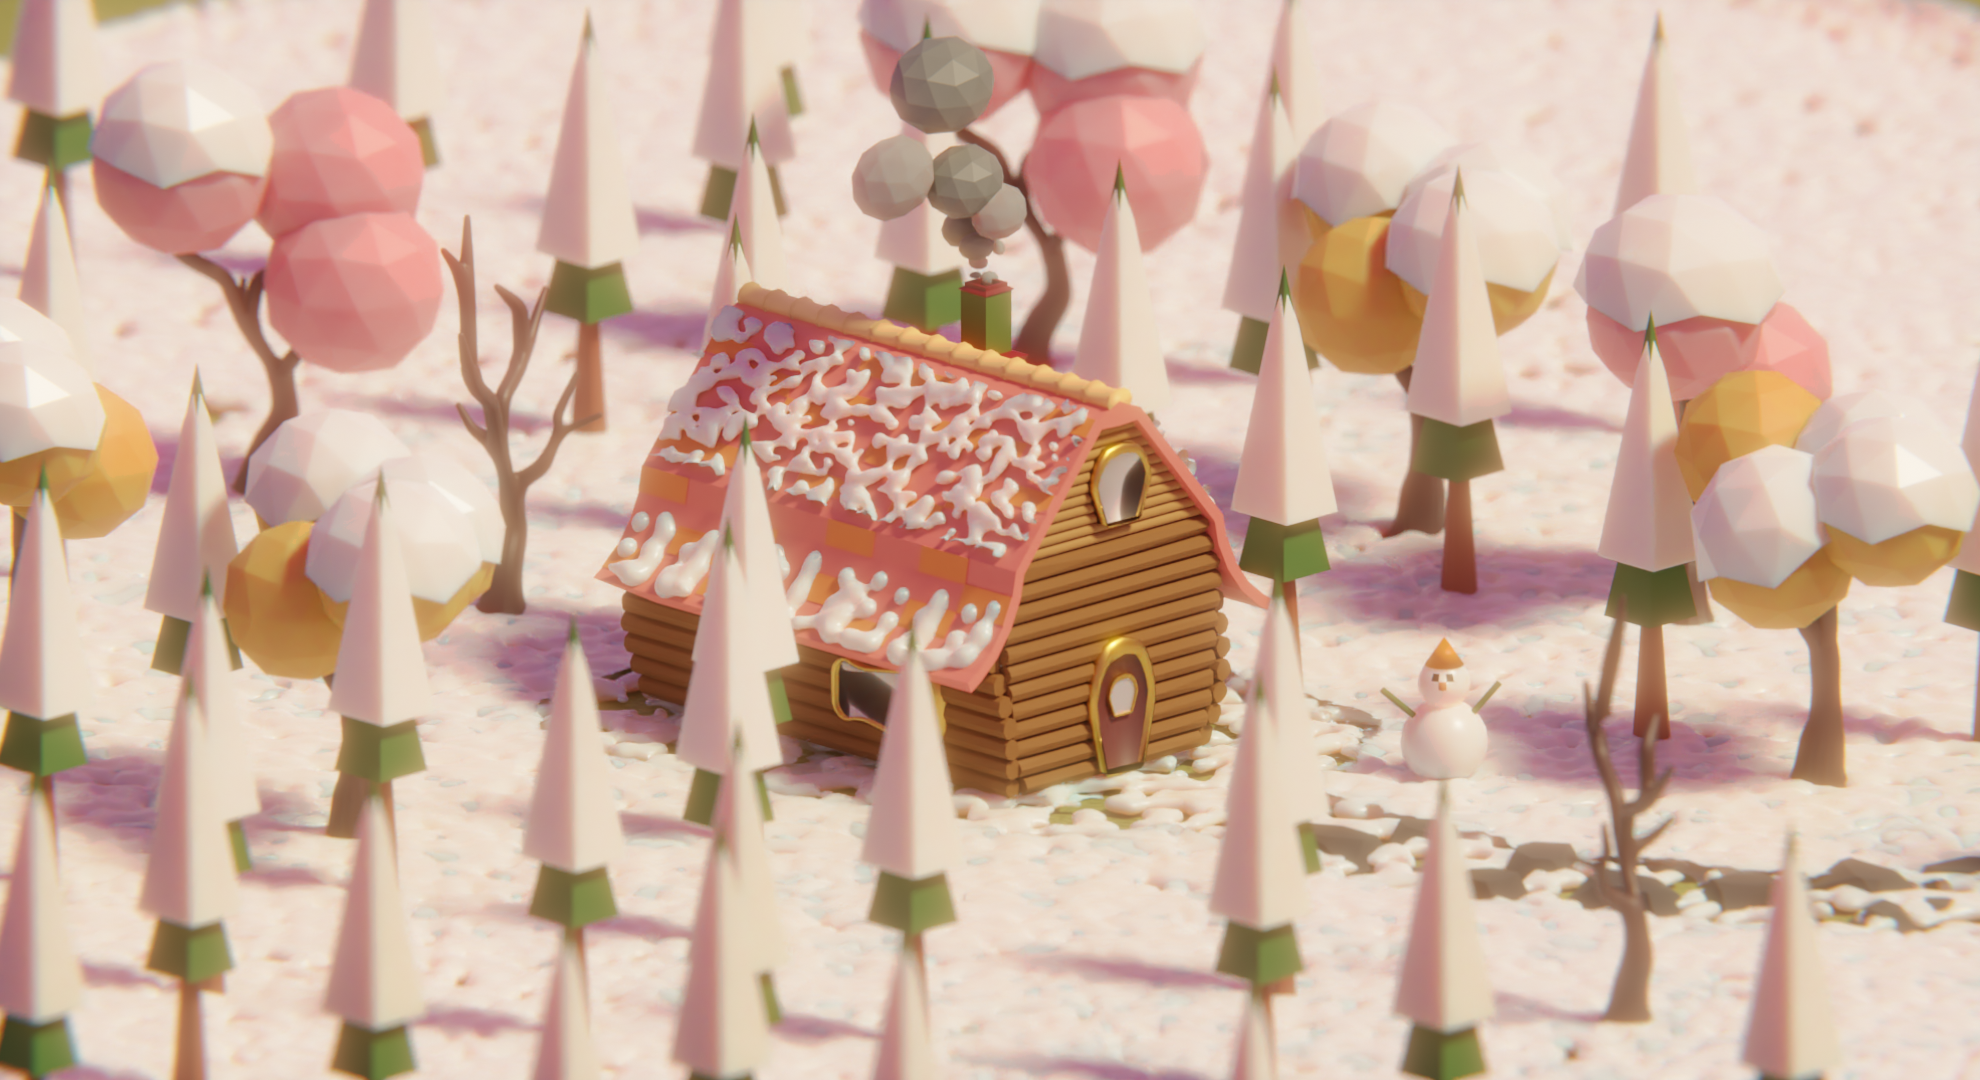 General 1980x1080 snow cabin trees winter isometric